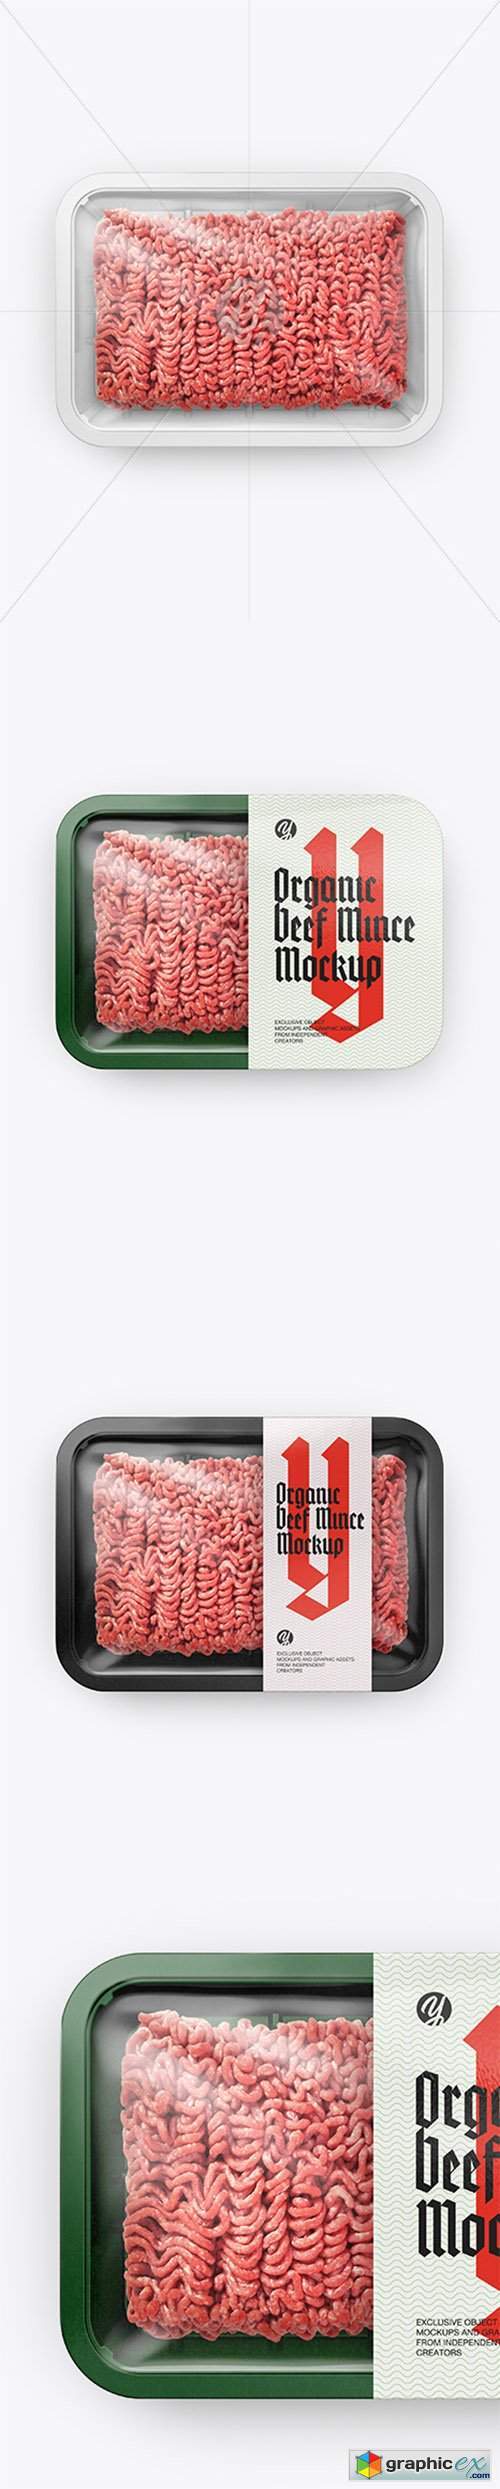 Plastic Tray With Beef Mince Mockup - Top View